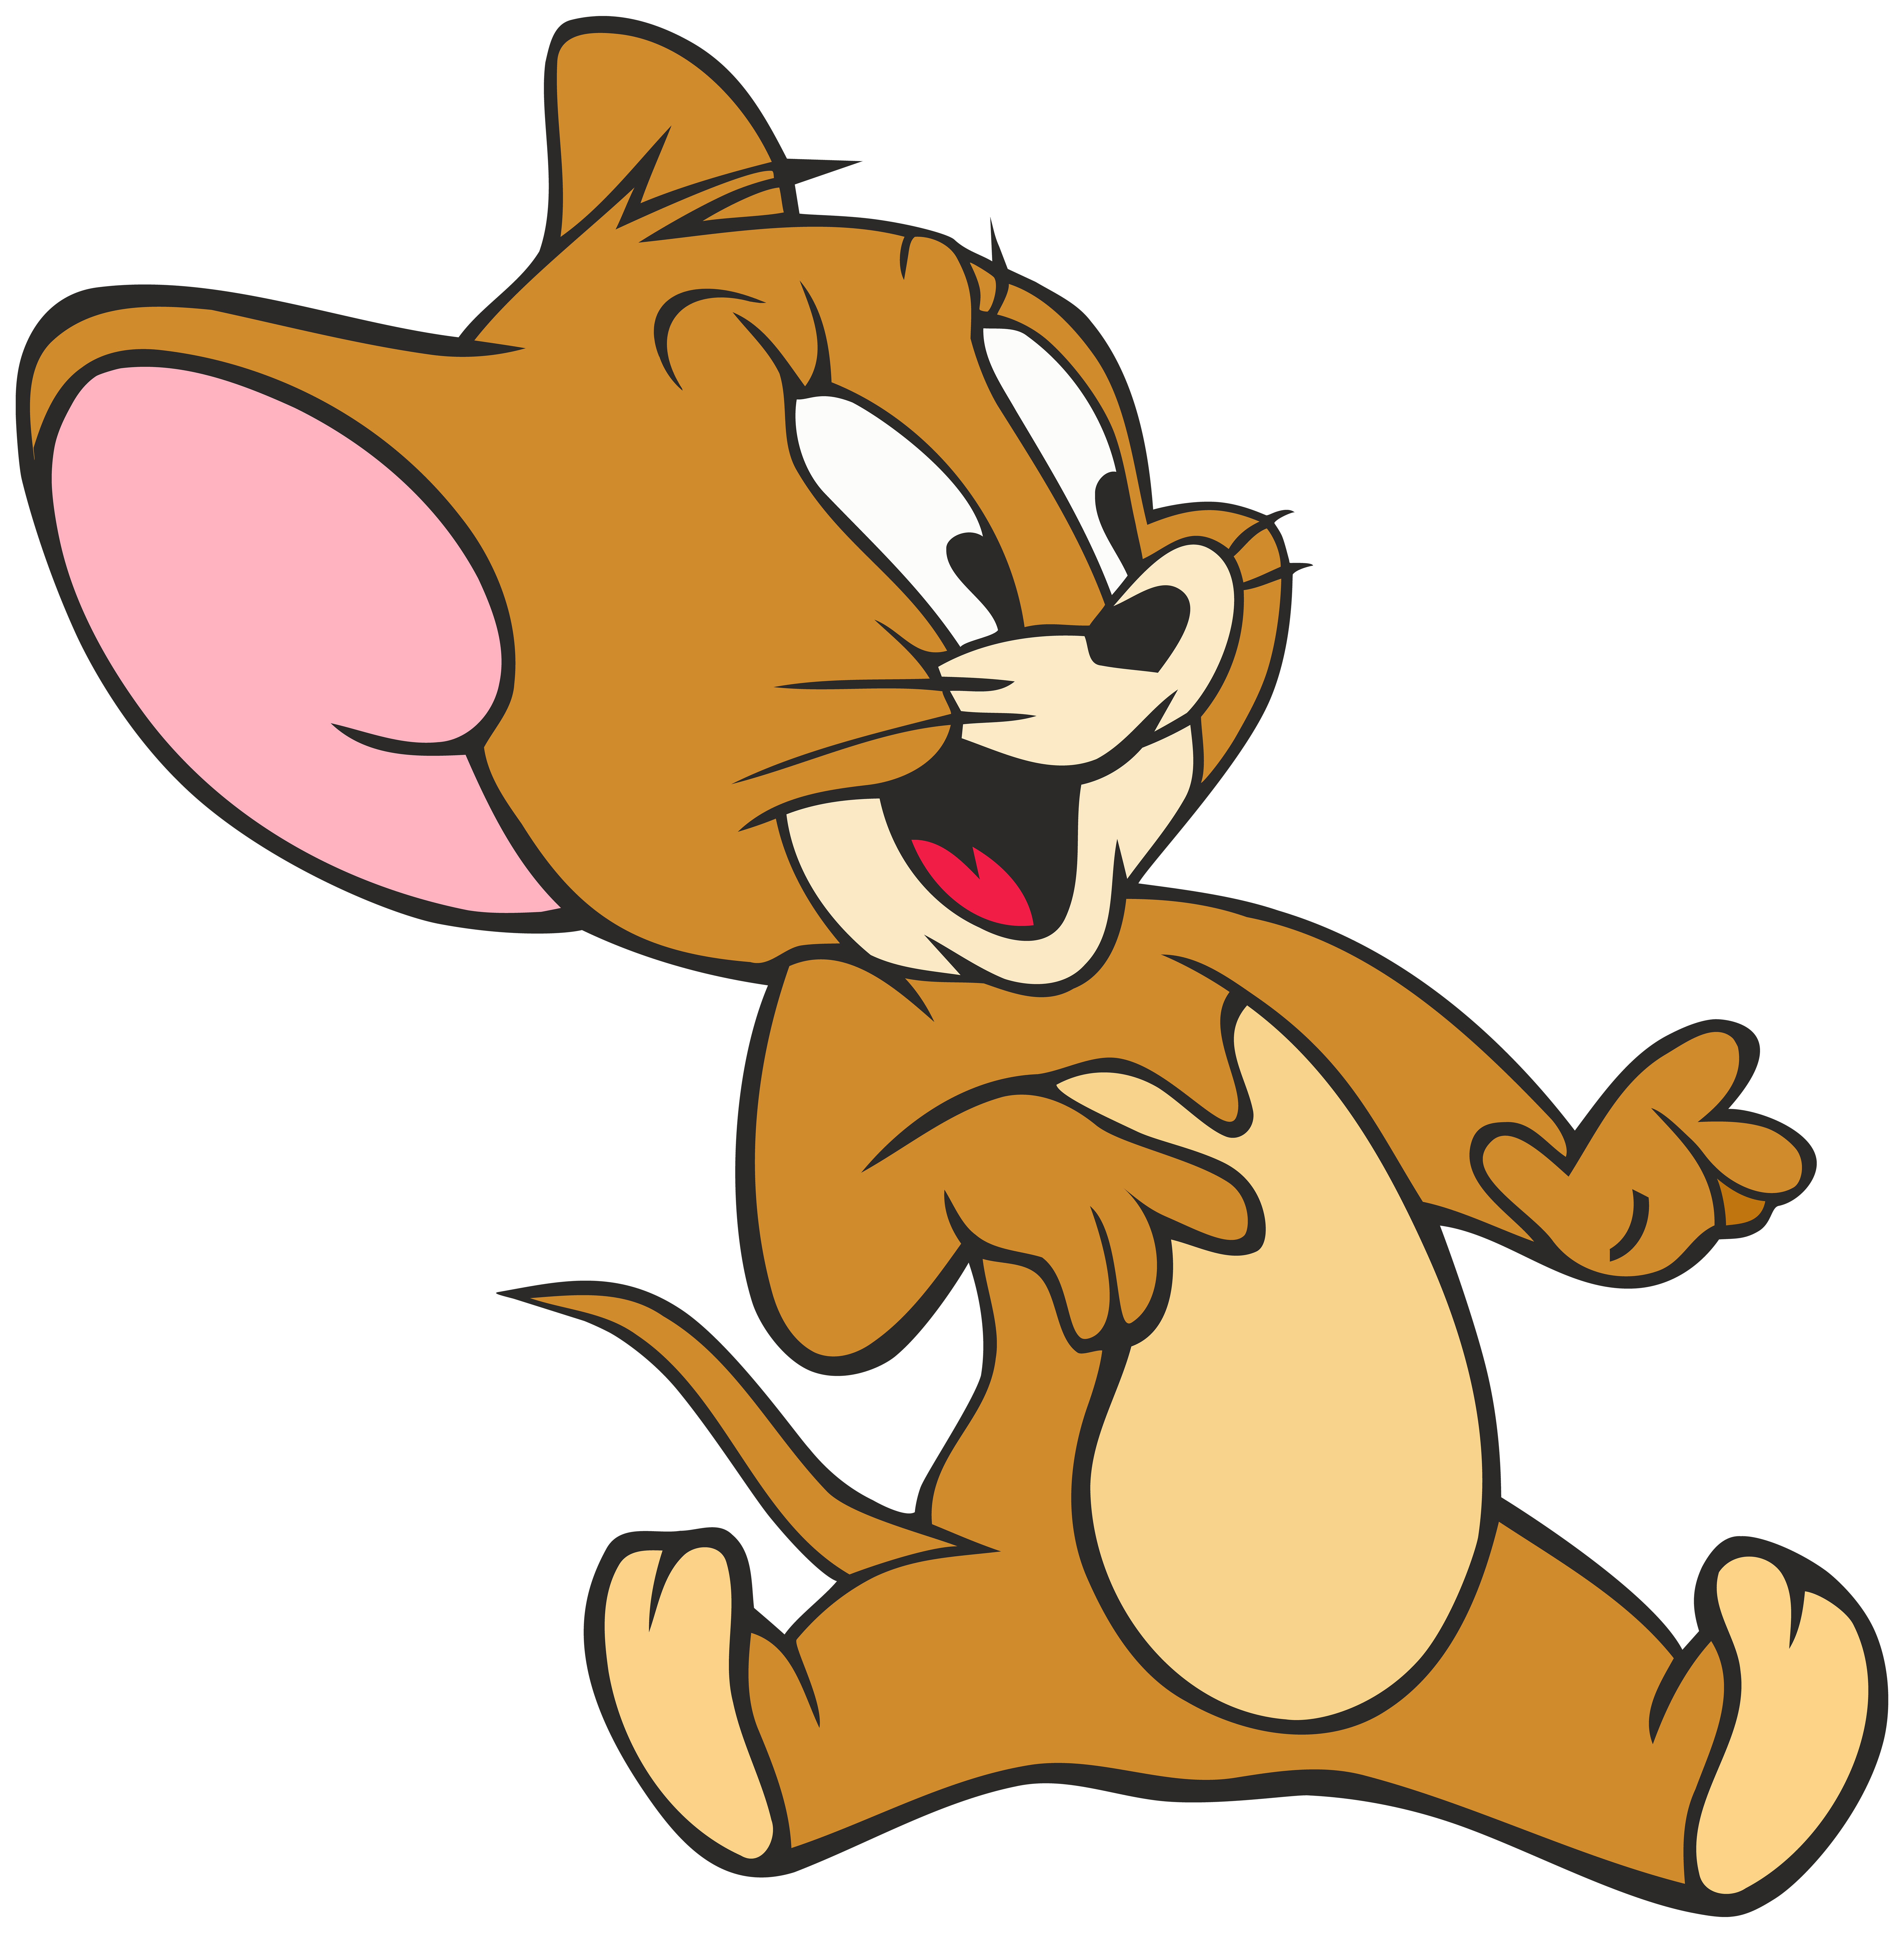 Jerry Mouse Animation Clip art - Jerry Free PNG Clip Art Image png